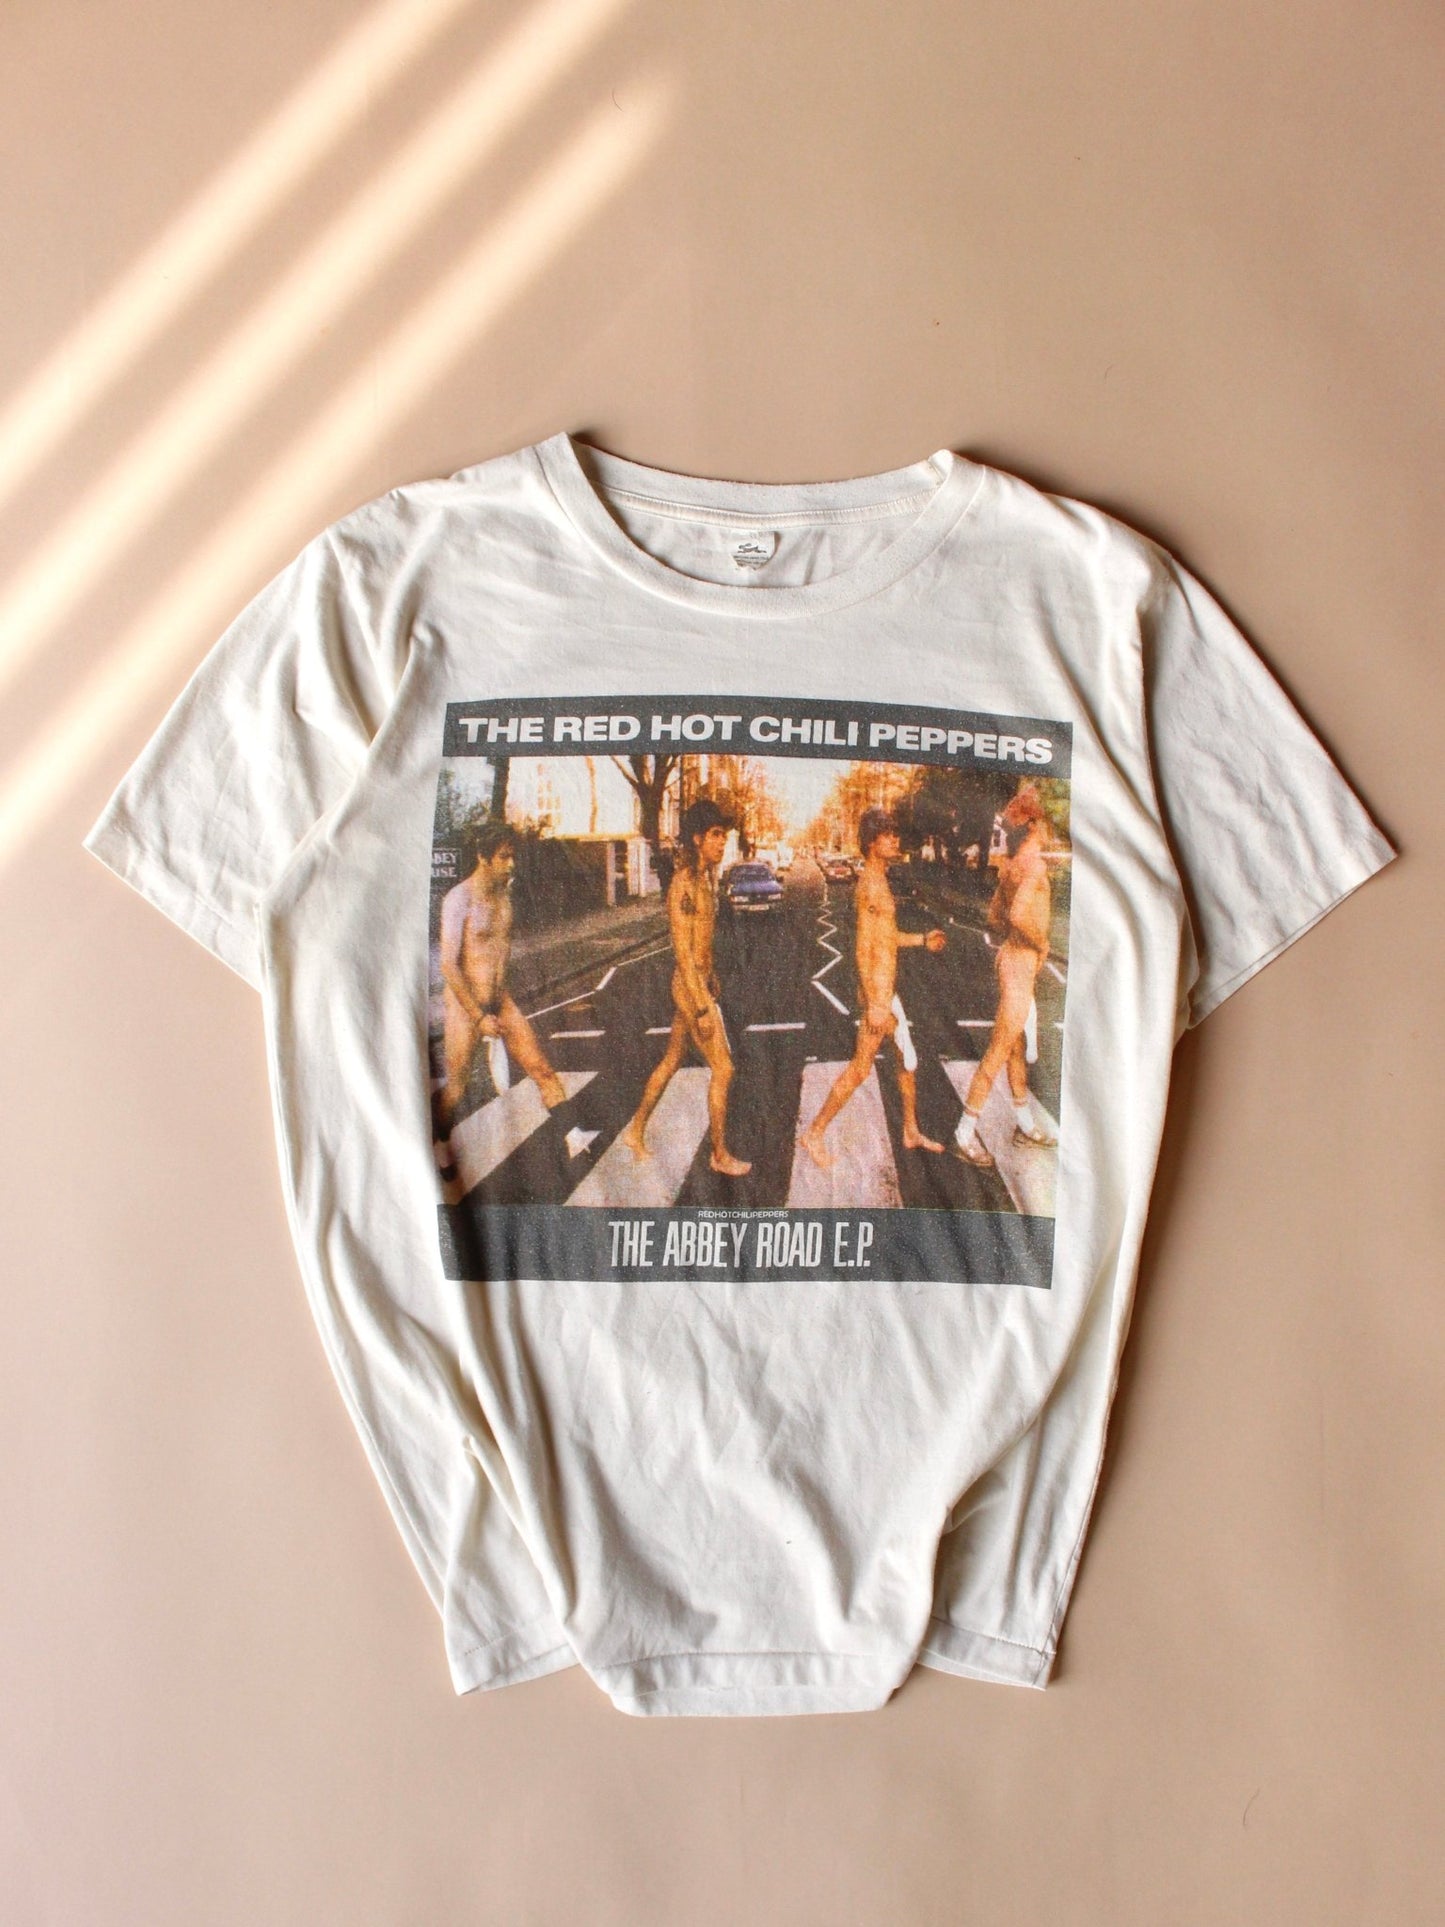 1990s Red Hot Chili Peppers “The Abbey Road E.P” Tee